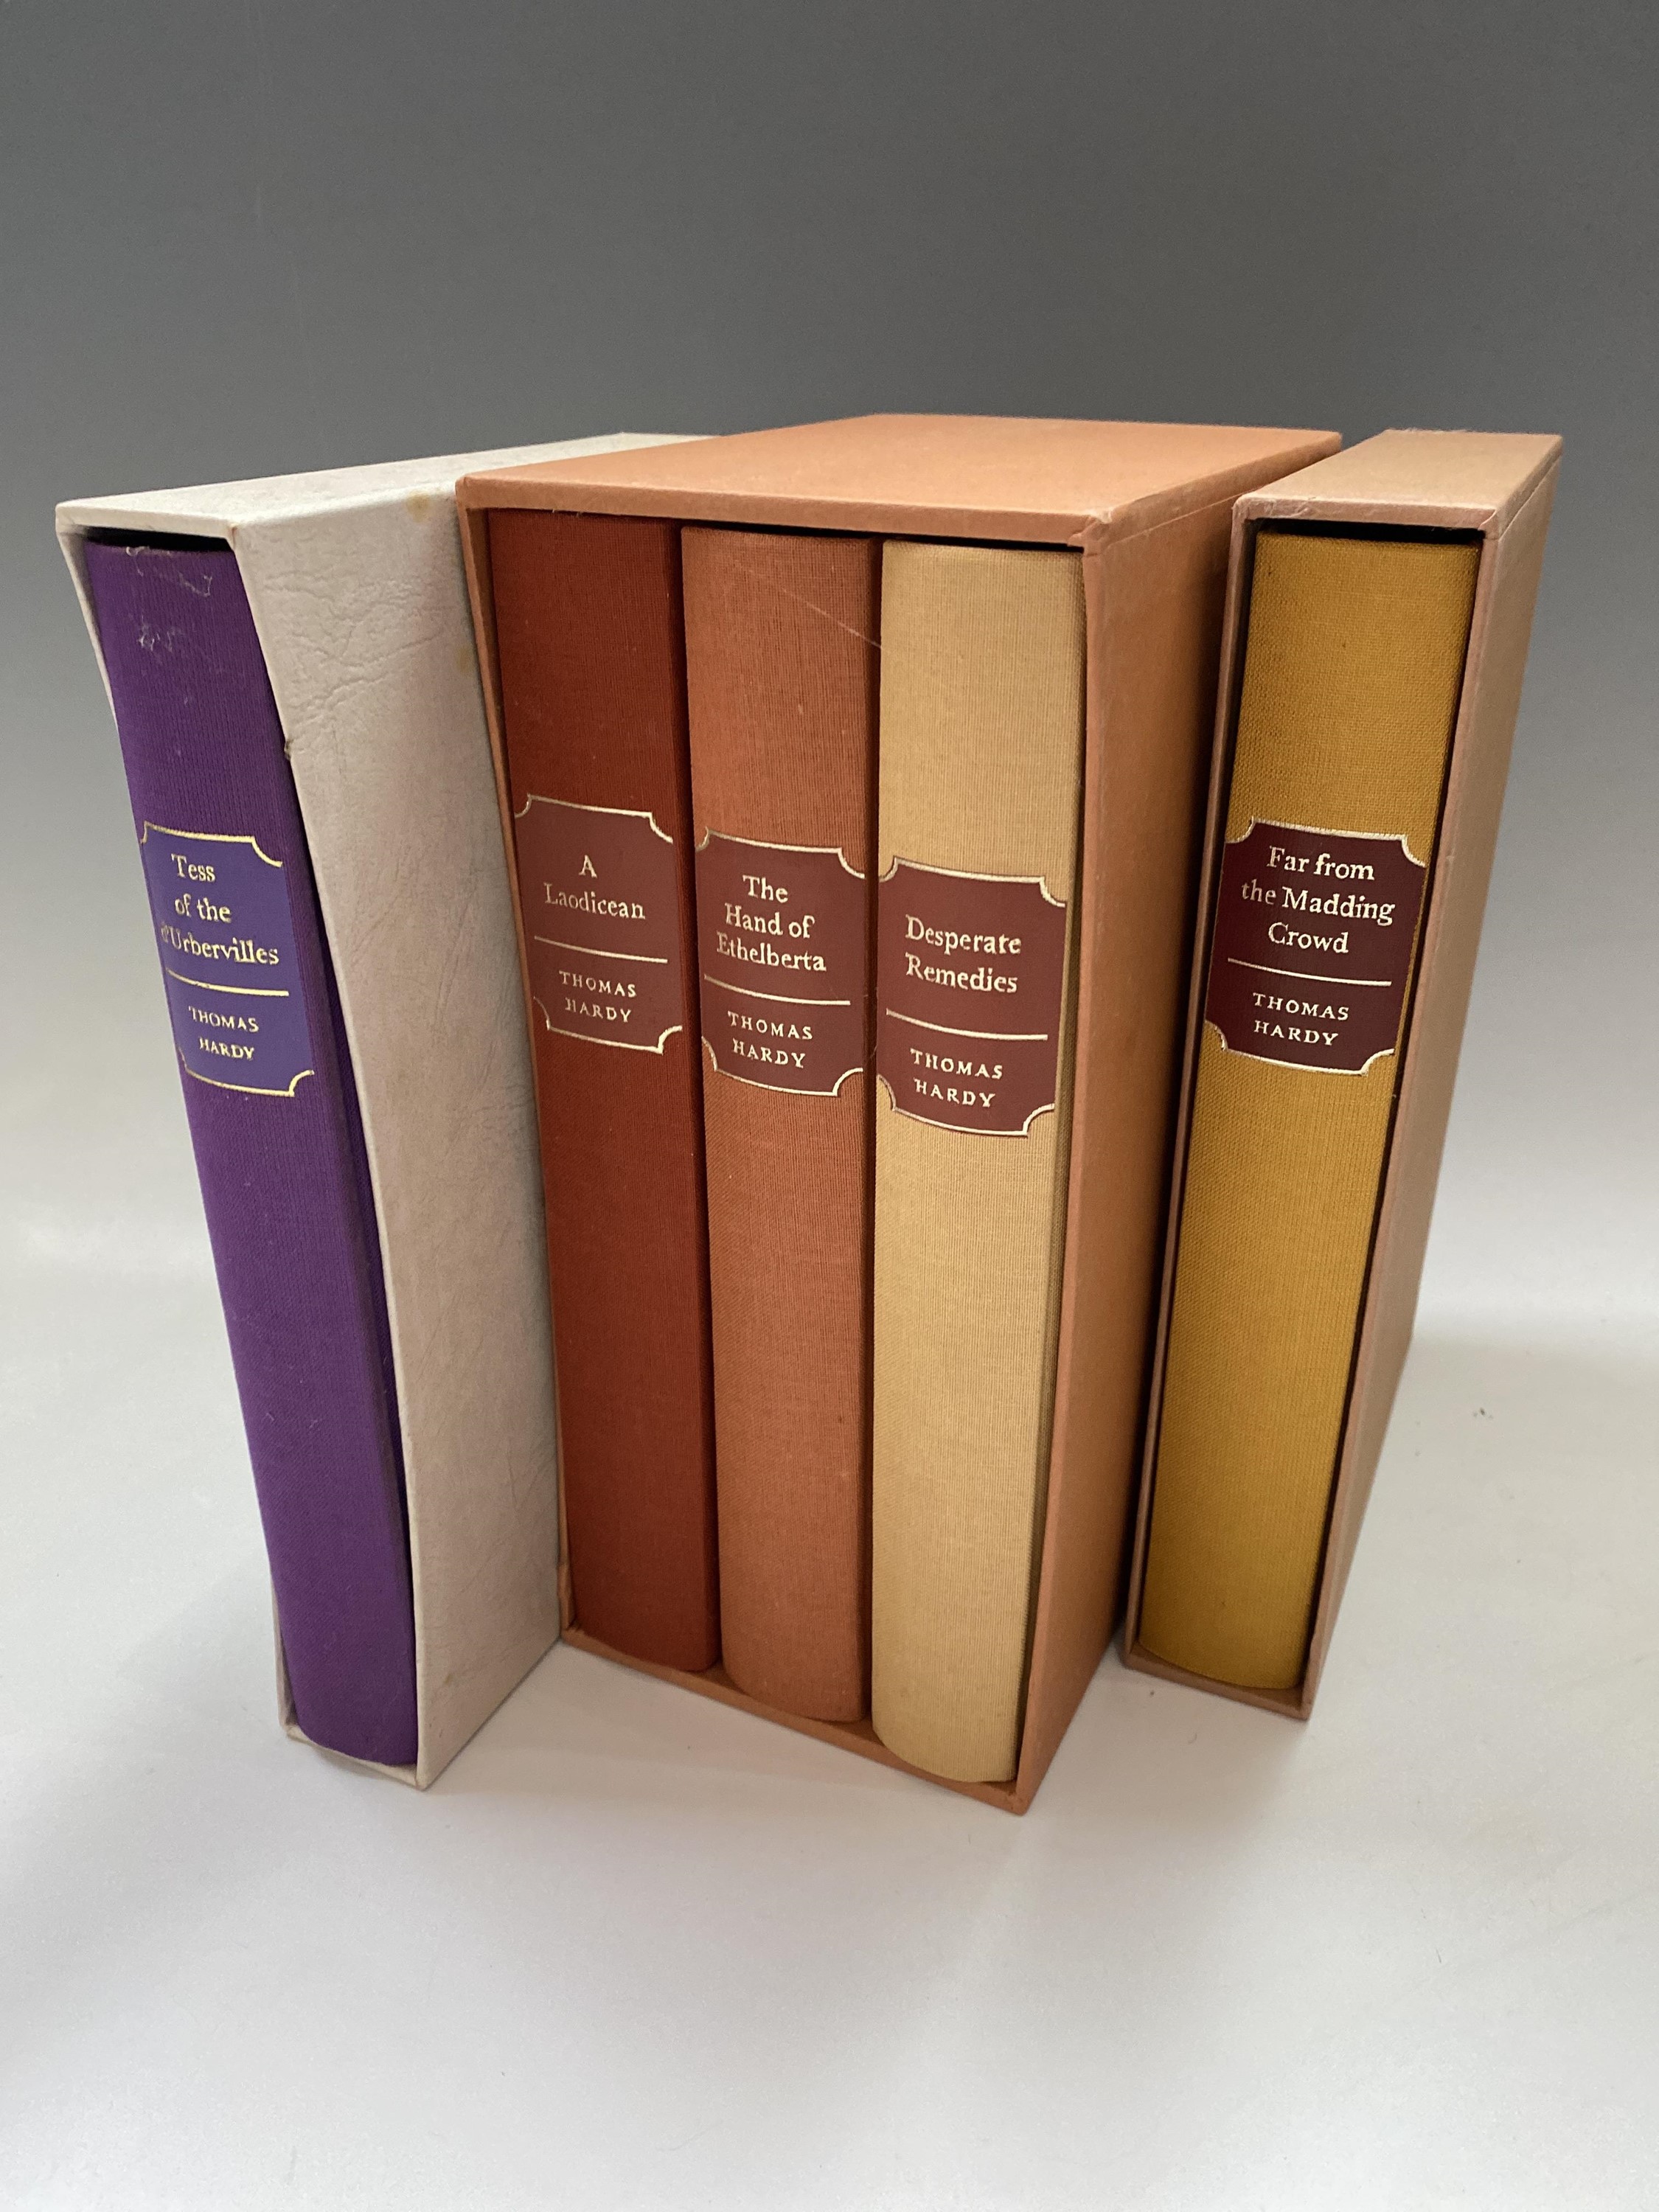 FOLIO SOCIETY. Sixteen volumes of Thomas Hardy including Tess d'Urbervilles, The Woodlanders, and - Image 2 of 5